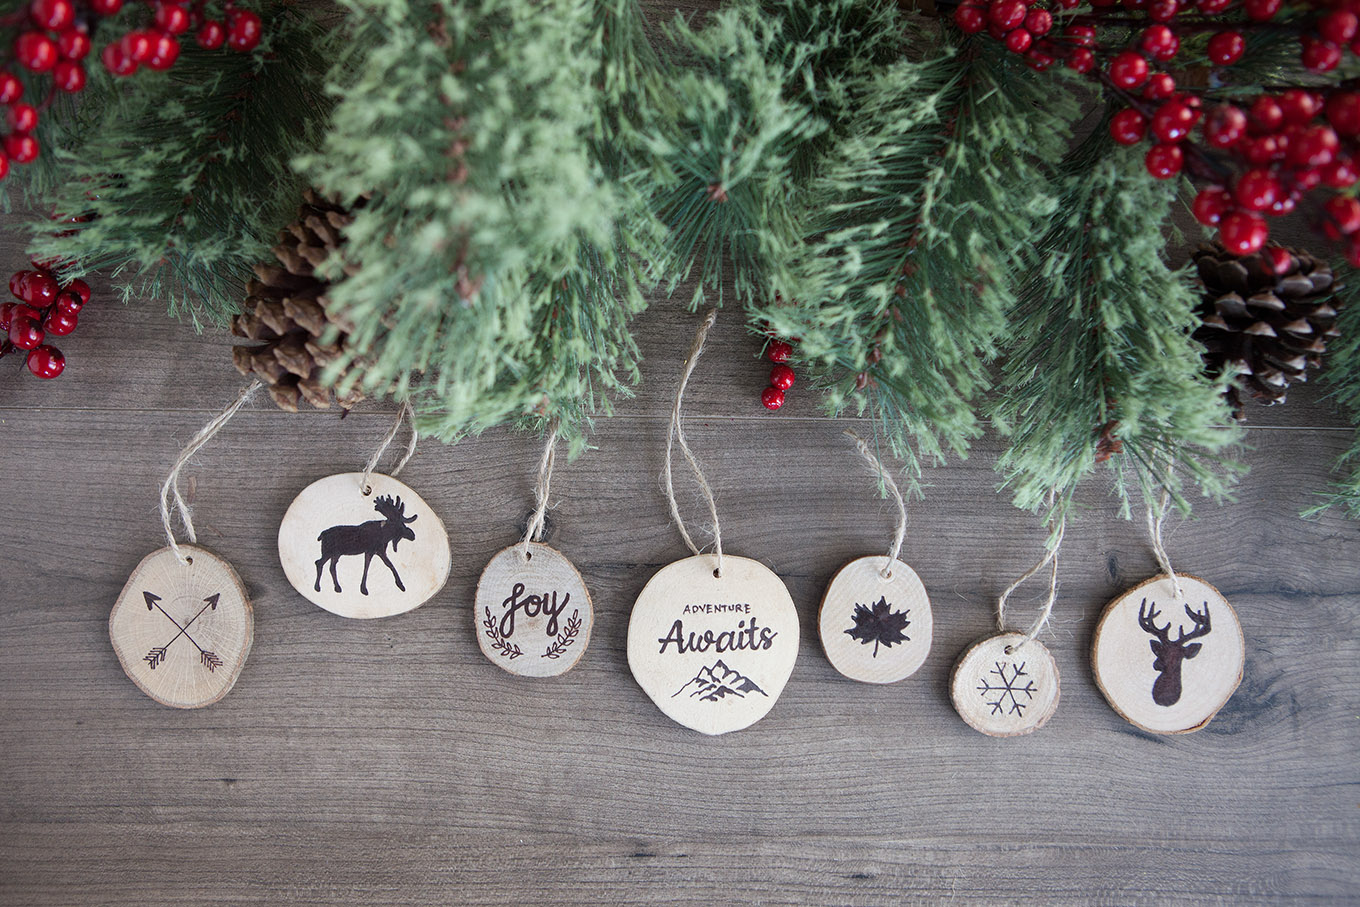 Create faux wood burned Christmas tree ornaments without any special tools. Complete how-to instructions including printable templates to make these easy, nature-inspired keepsakes.